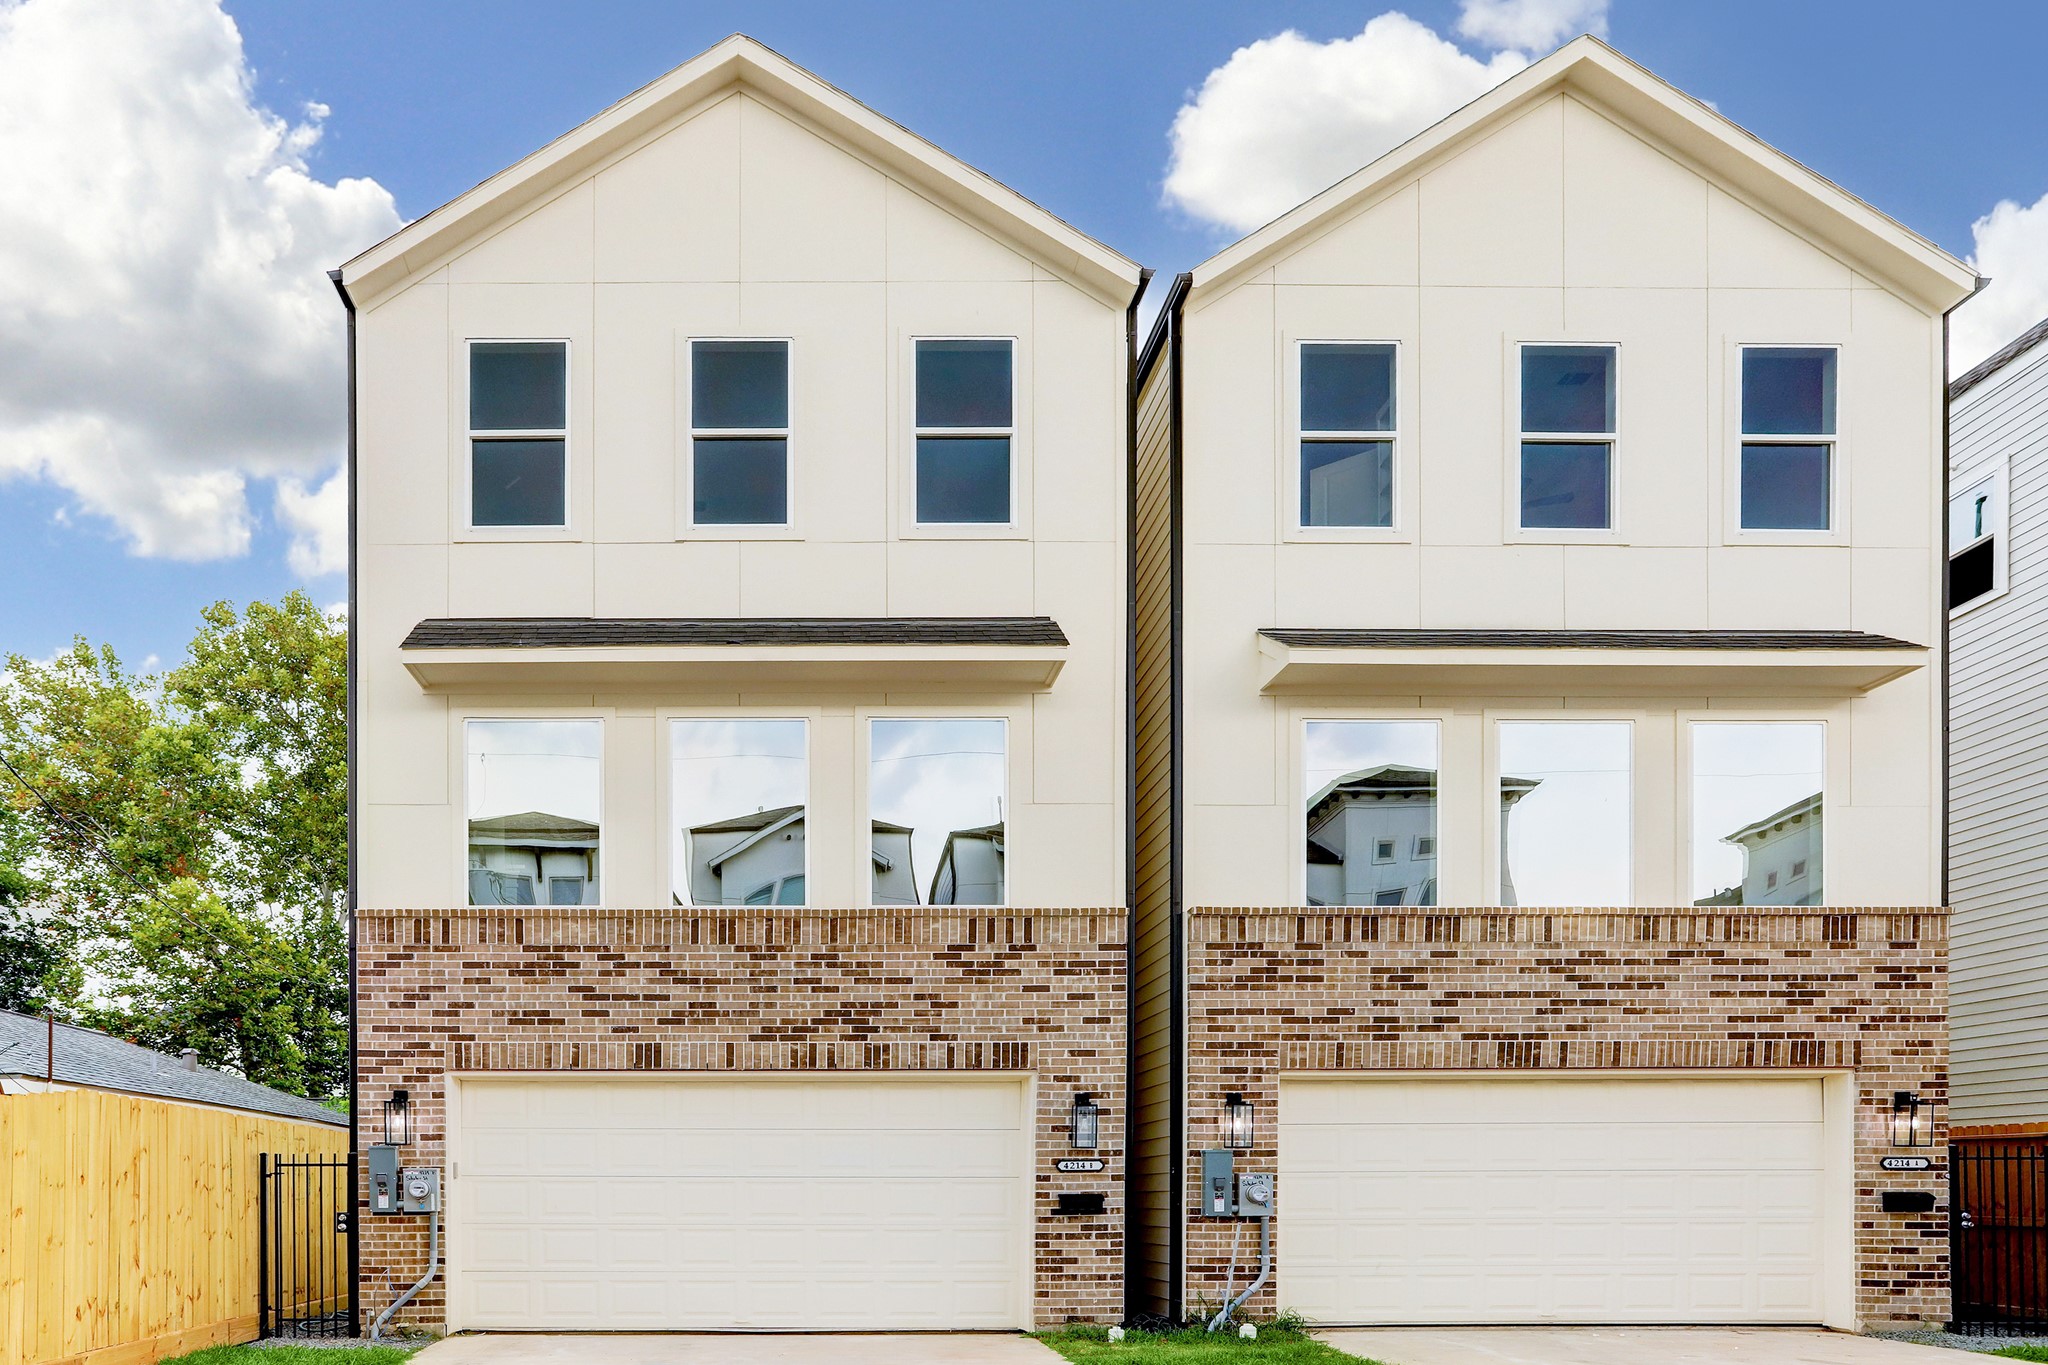 Brand New Freestanding Home * Private Driveway * Private Backyard * 3 Bedrooms and 3 and 1/2 Bathrooms PLUS a Study * UPGRADED to the MAX * Unit B is the Home on the Left.